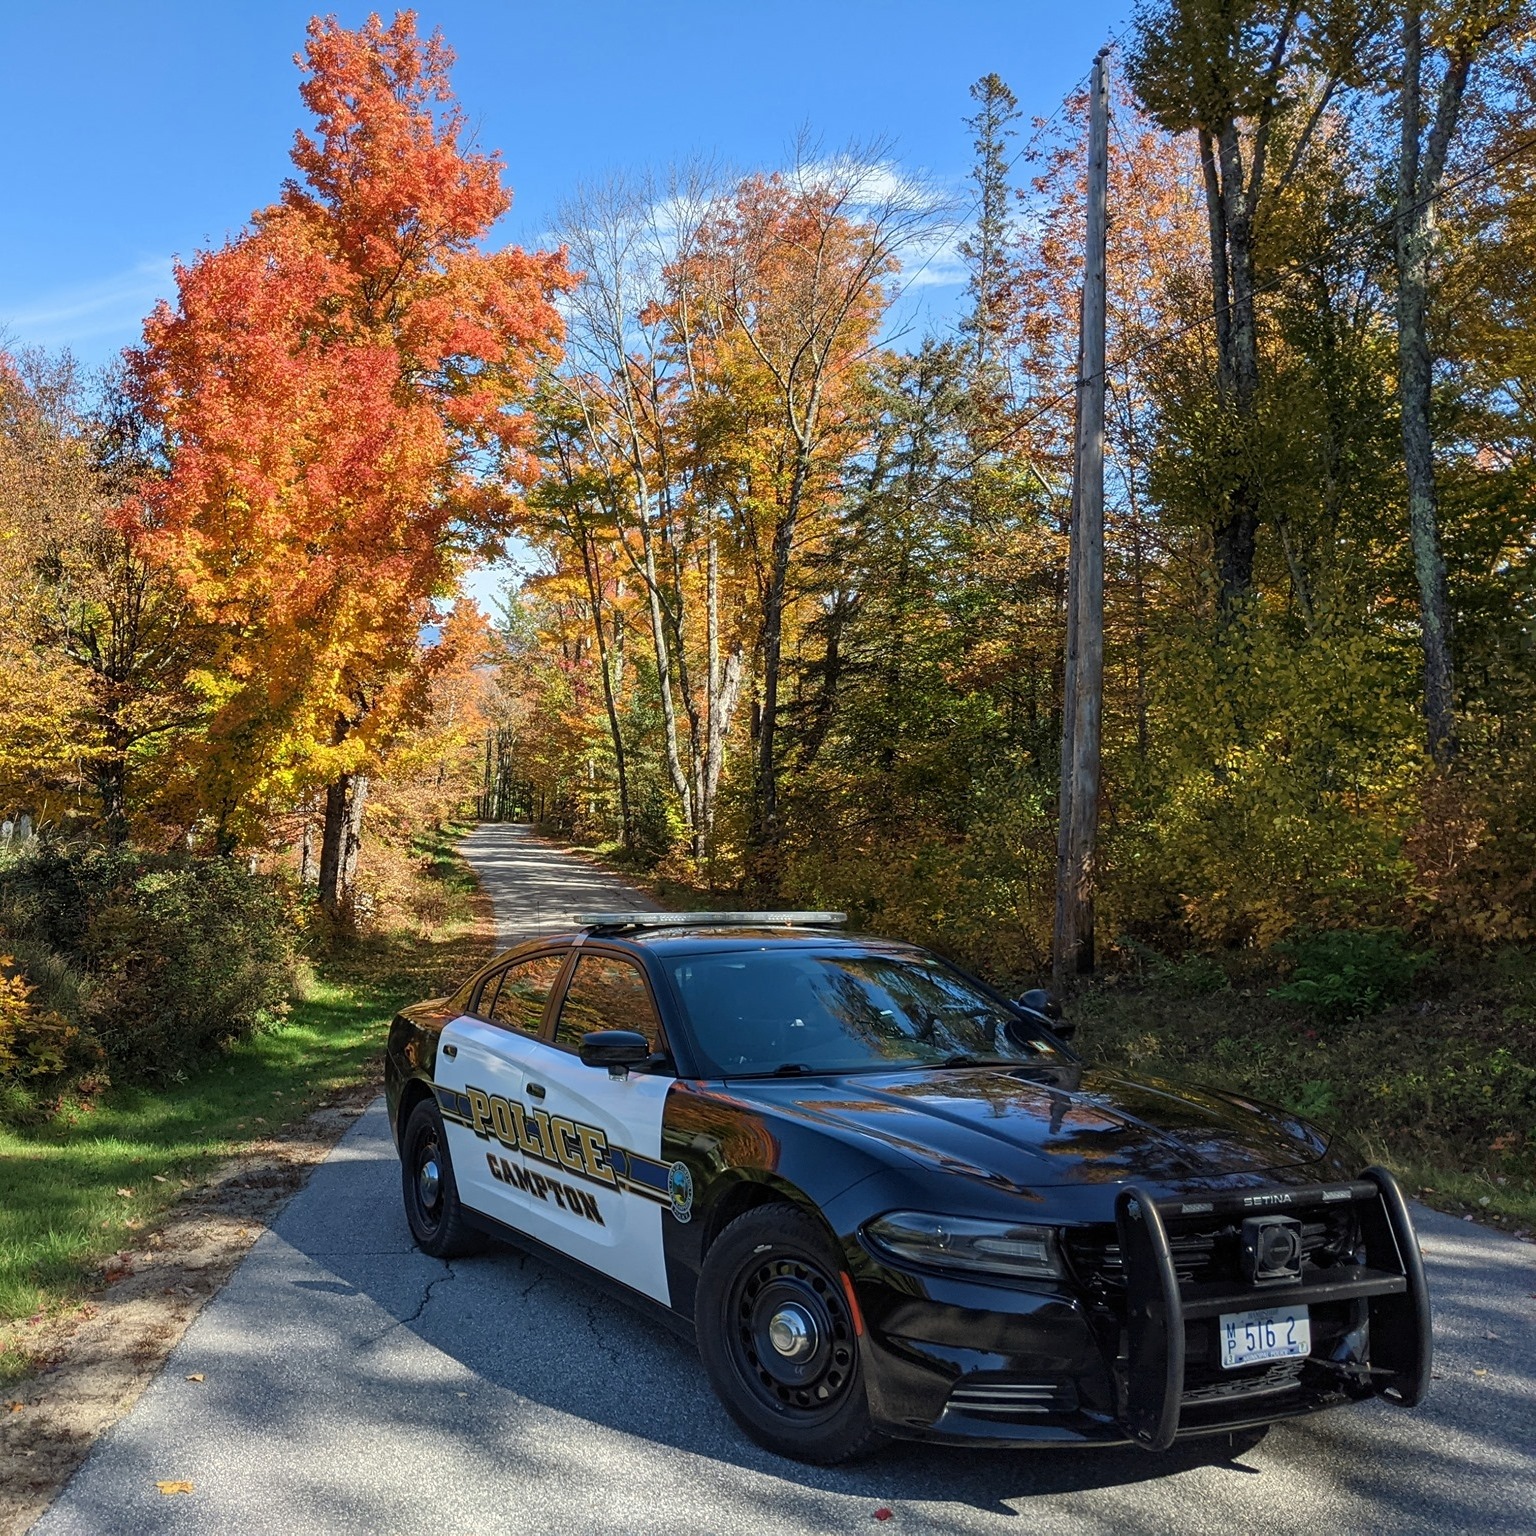 Campton Police Department, NH Public Safety Jobs